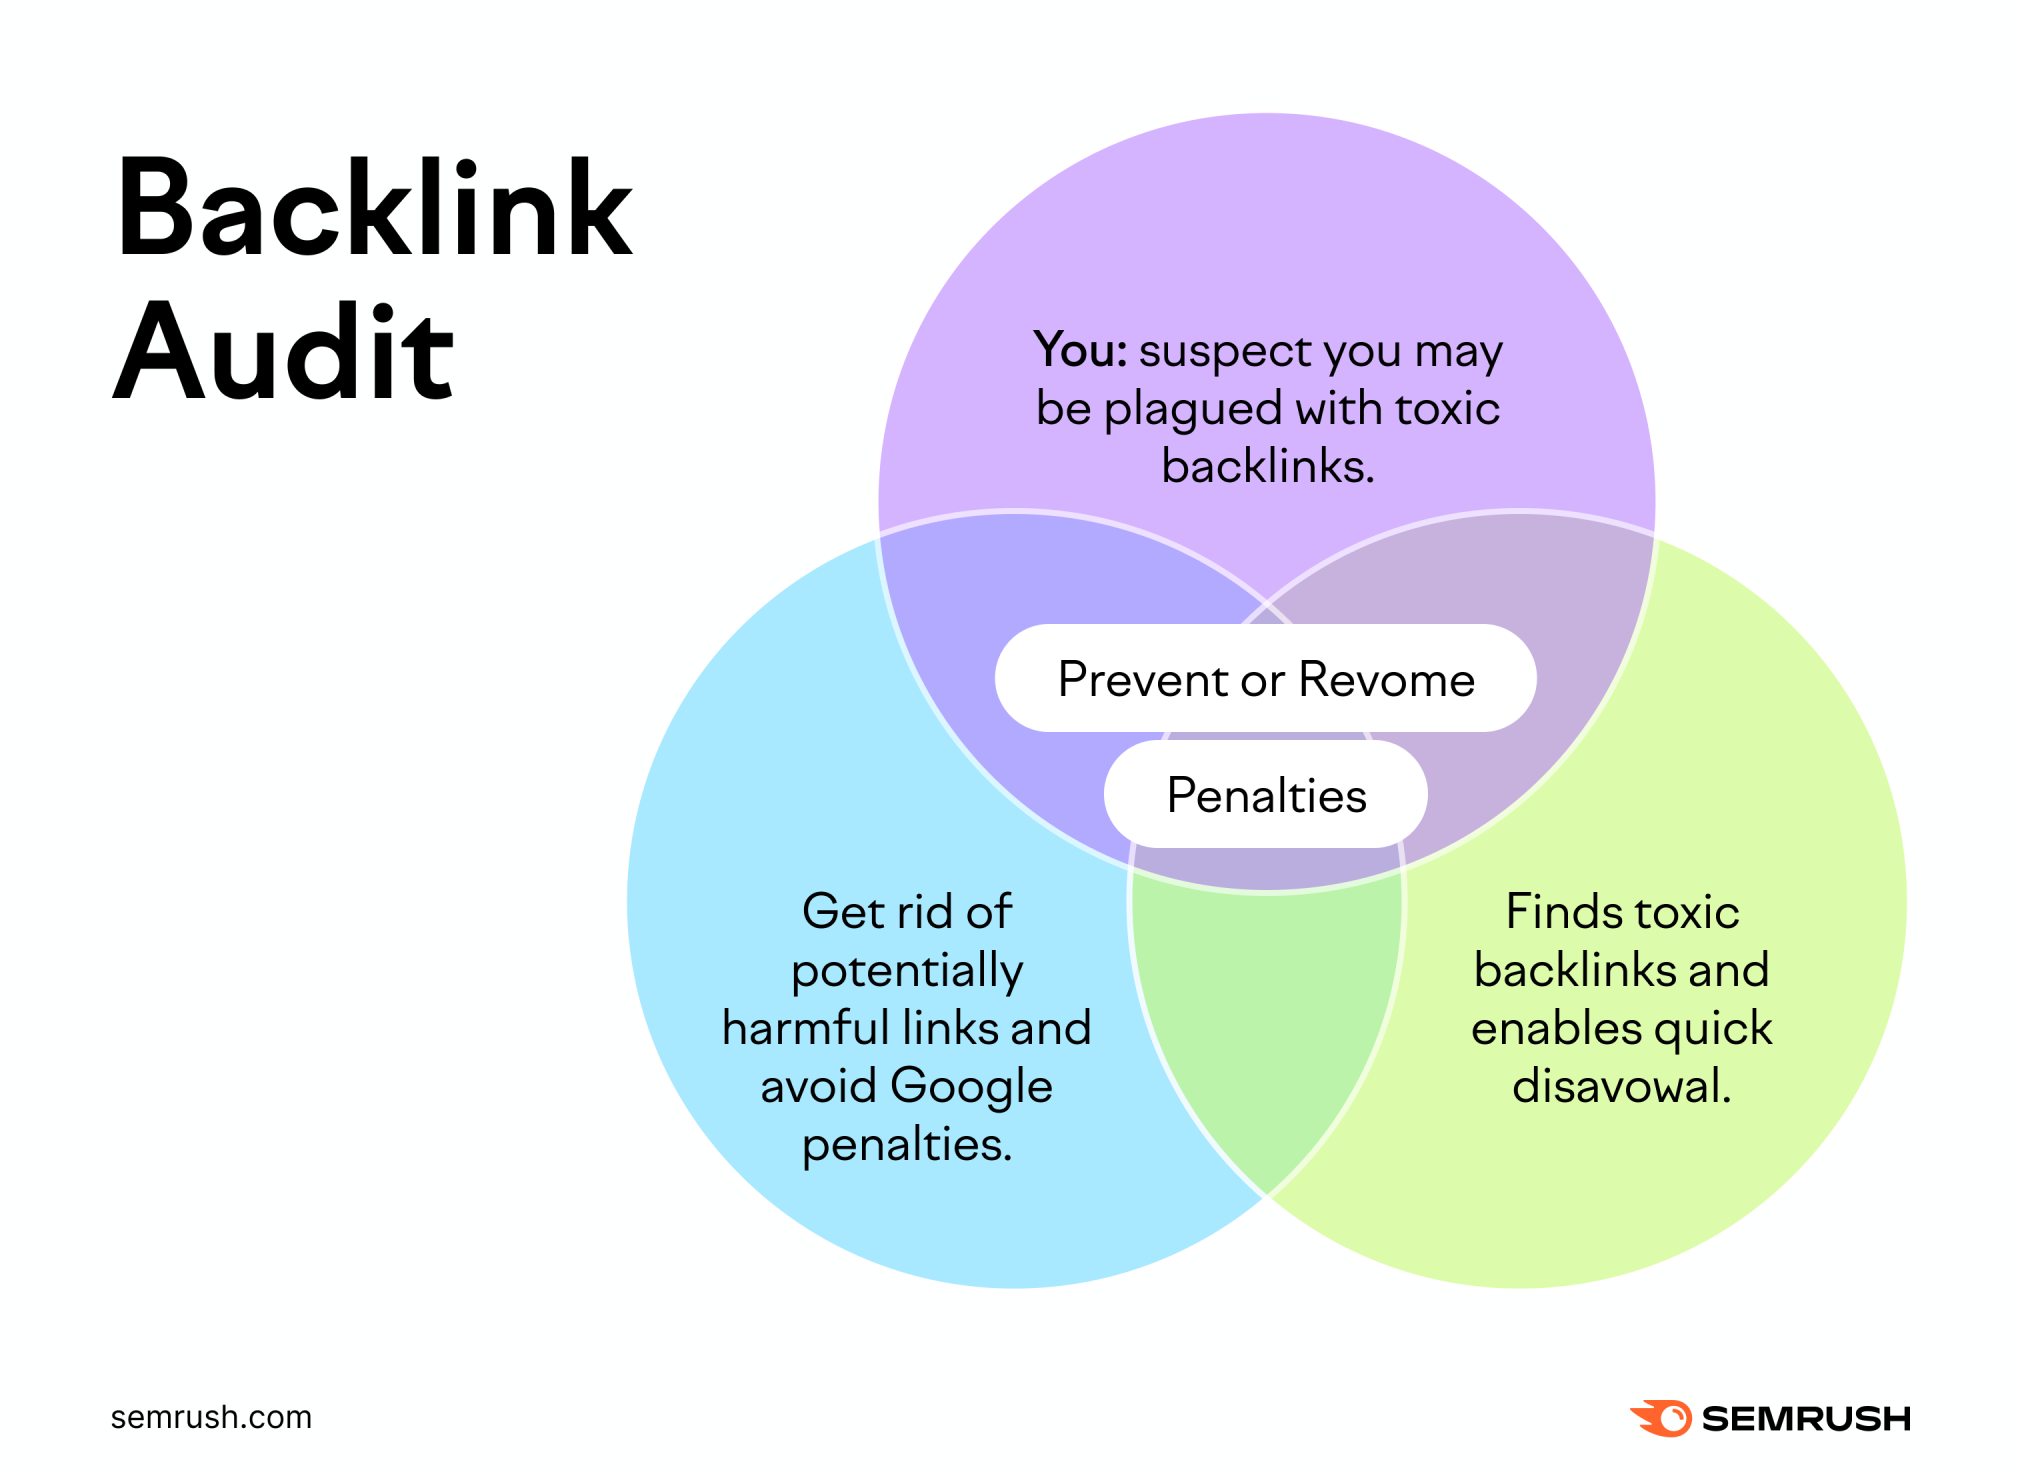 Need to prevent or remove penalties resulting from harmful links? Backlink Audit is your tool.